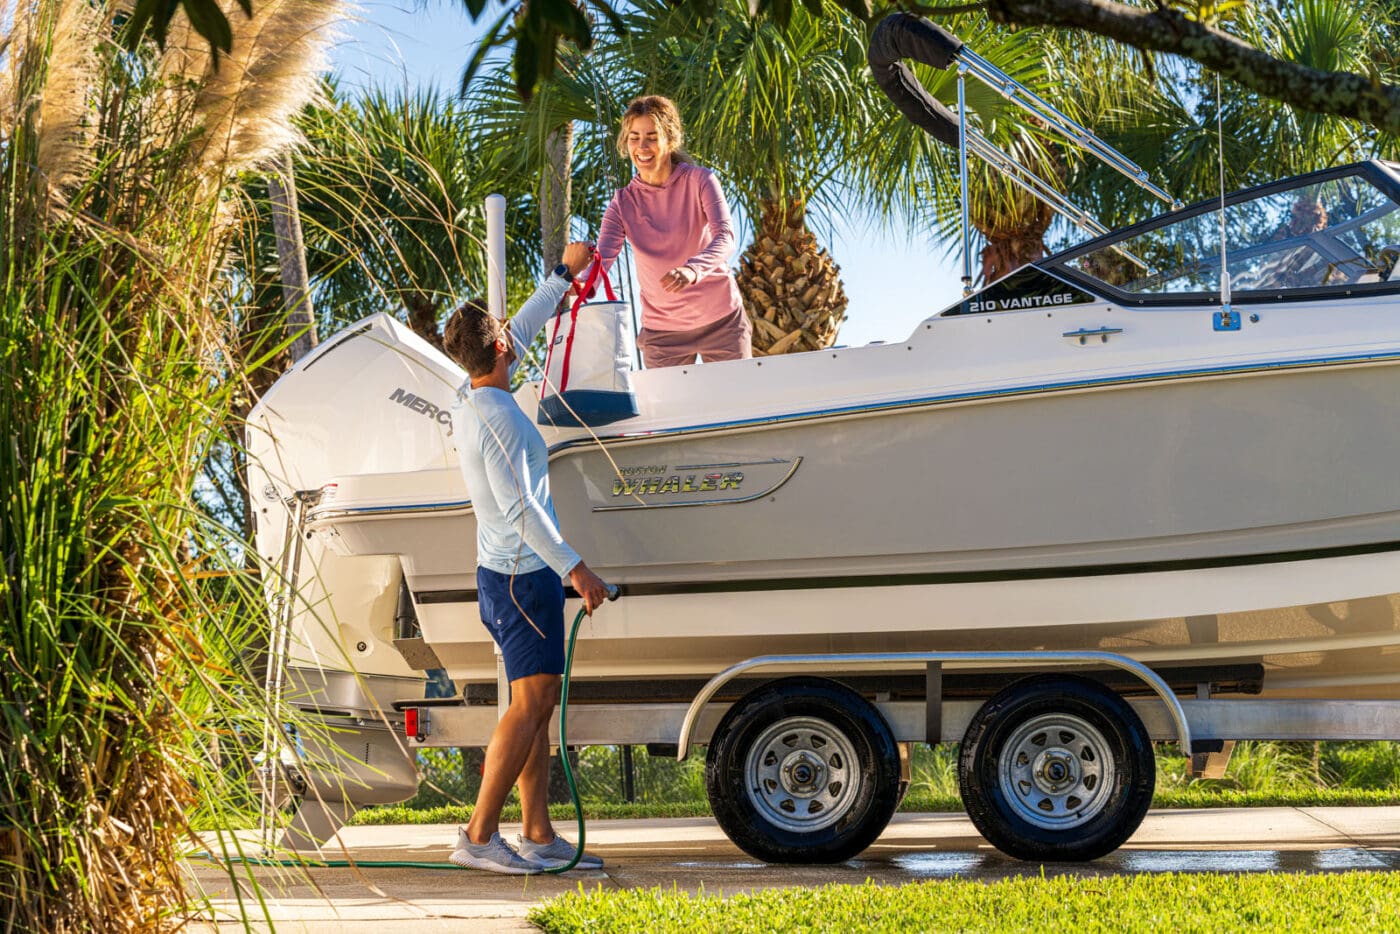 A man helps his wife load their Boston Whaler 210 Vantage.